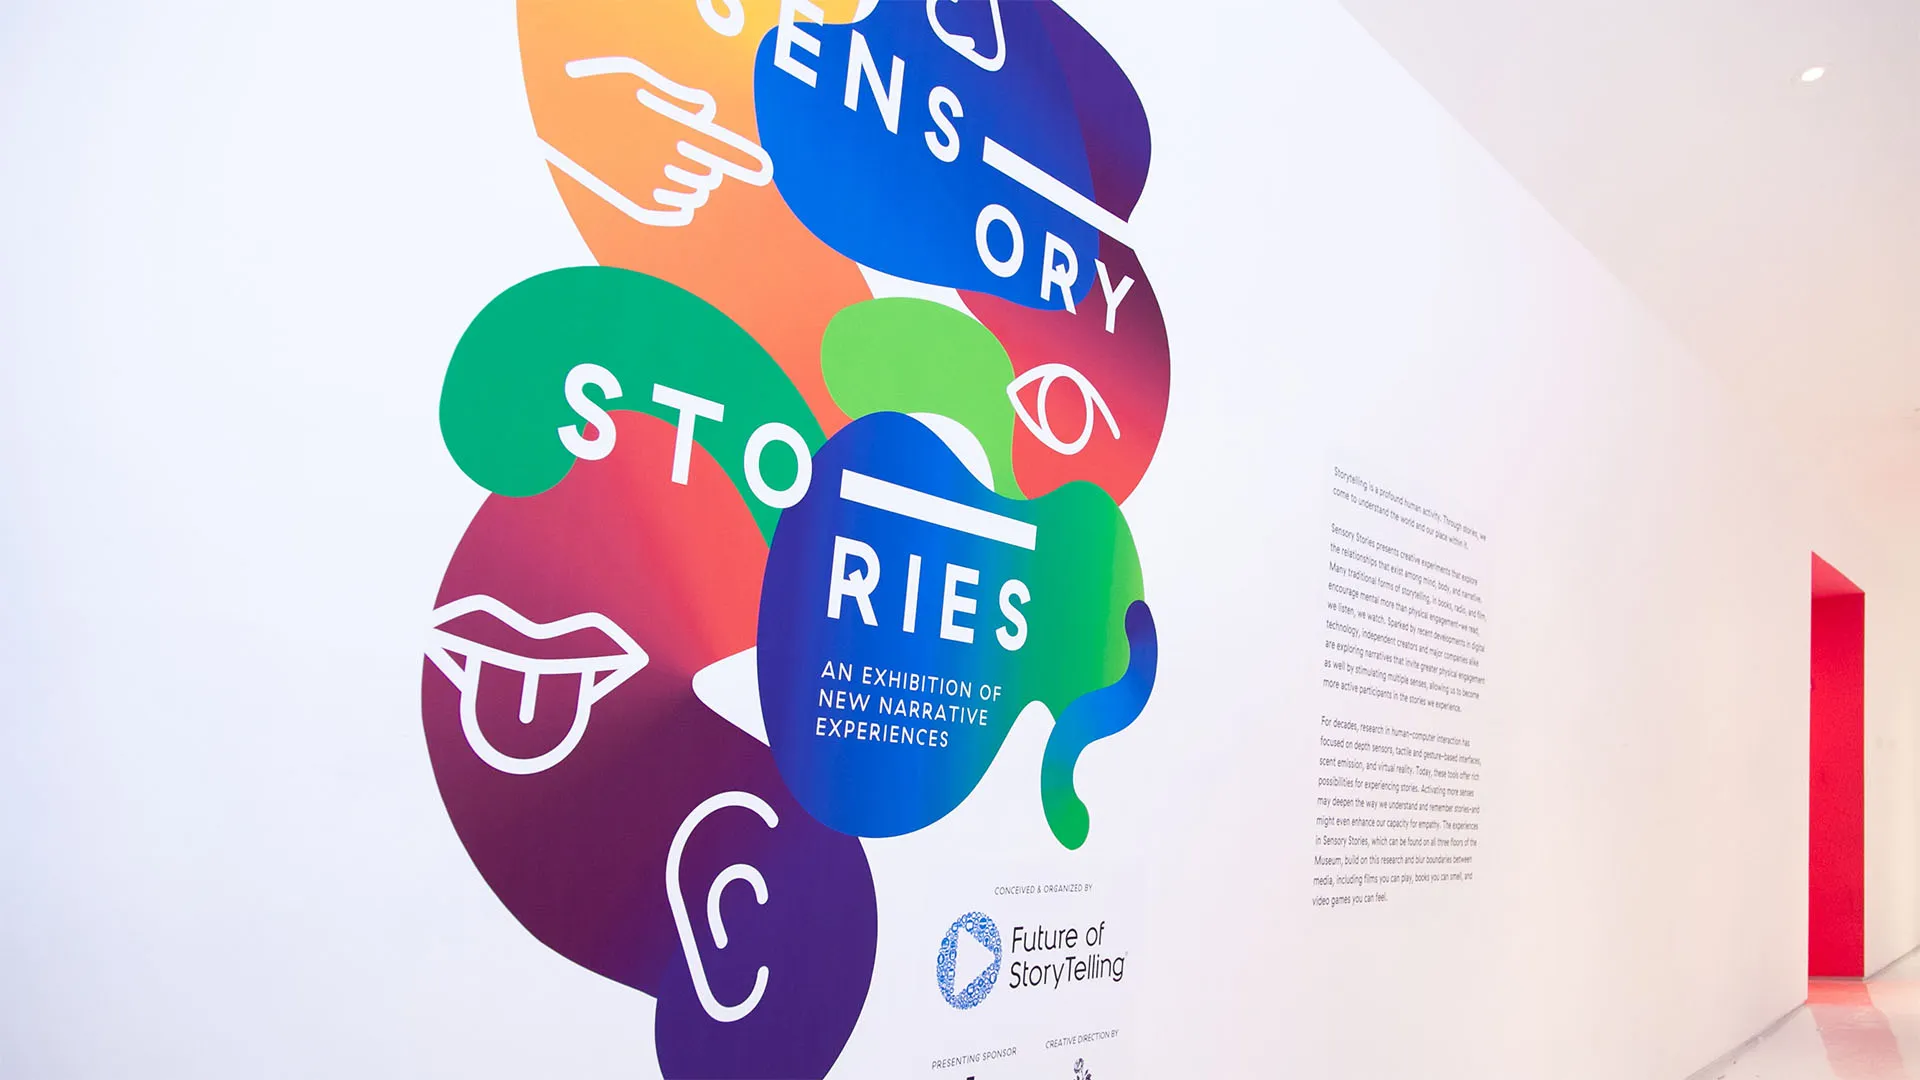 Hidden Stories - Sensory Stories was conceived and organized by the Future of StoryTelling